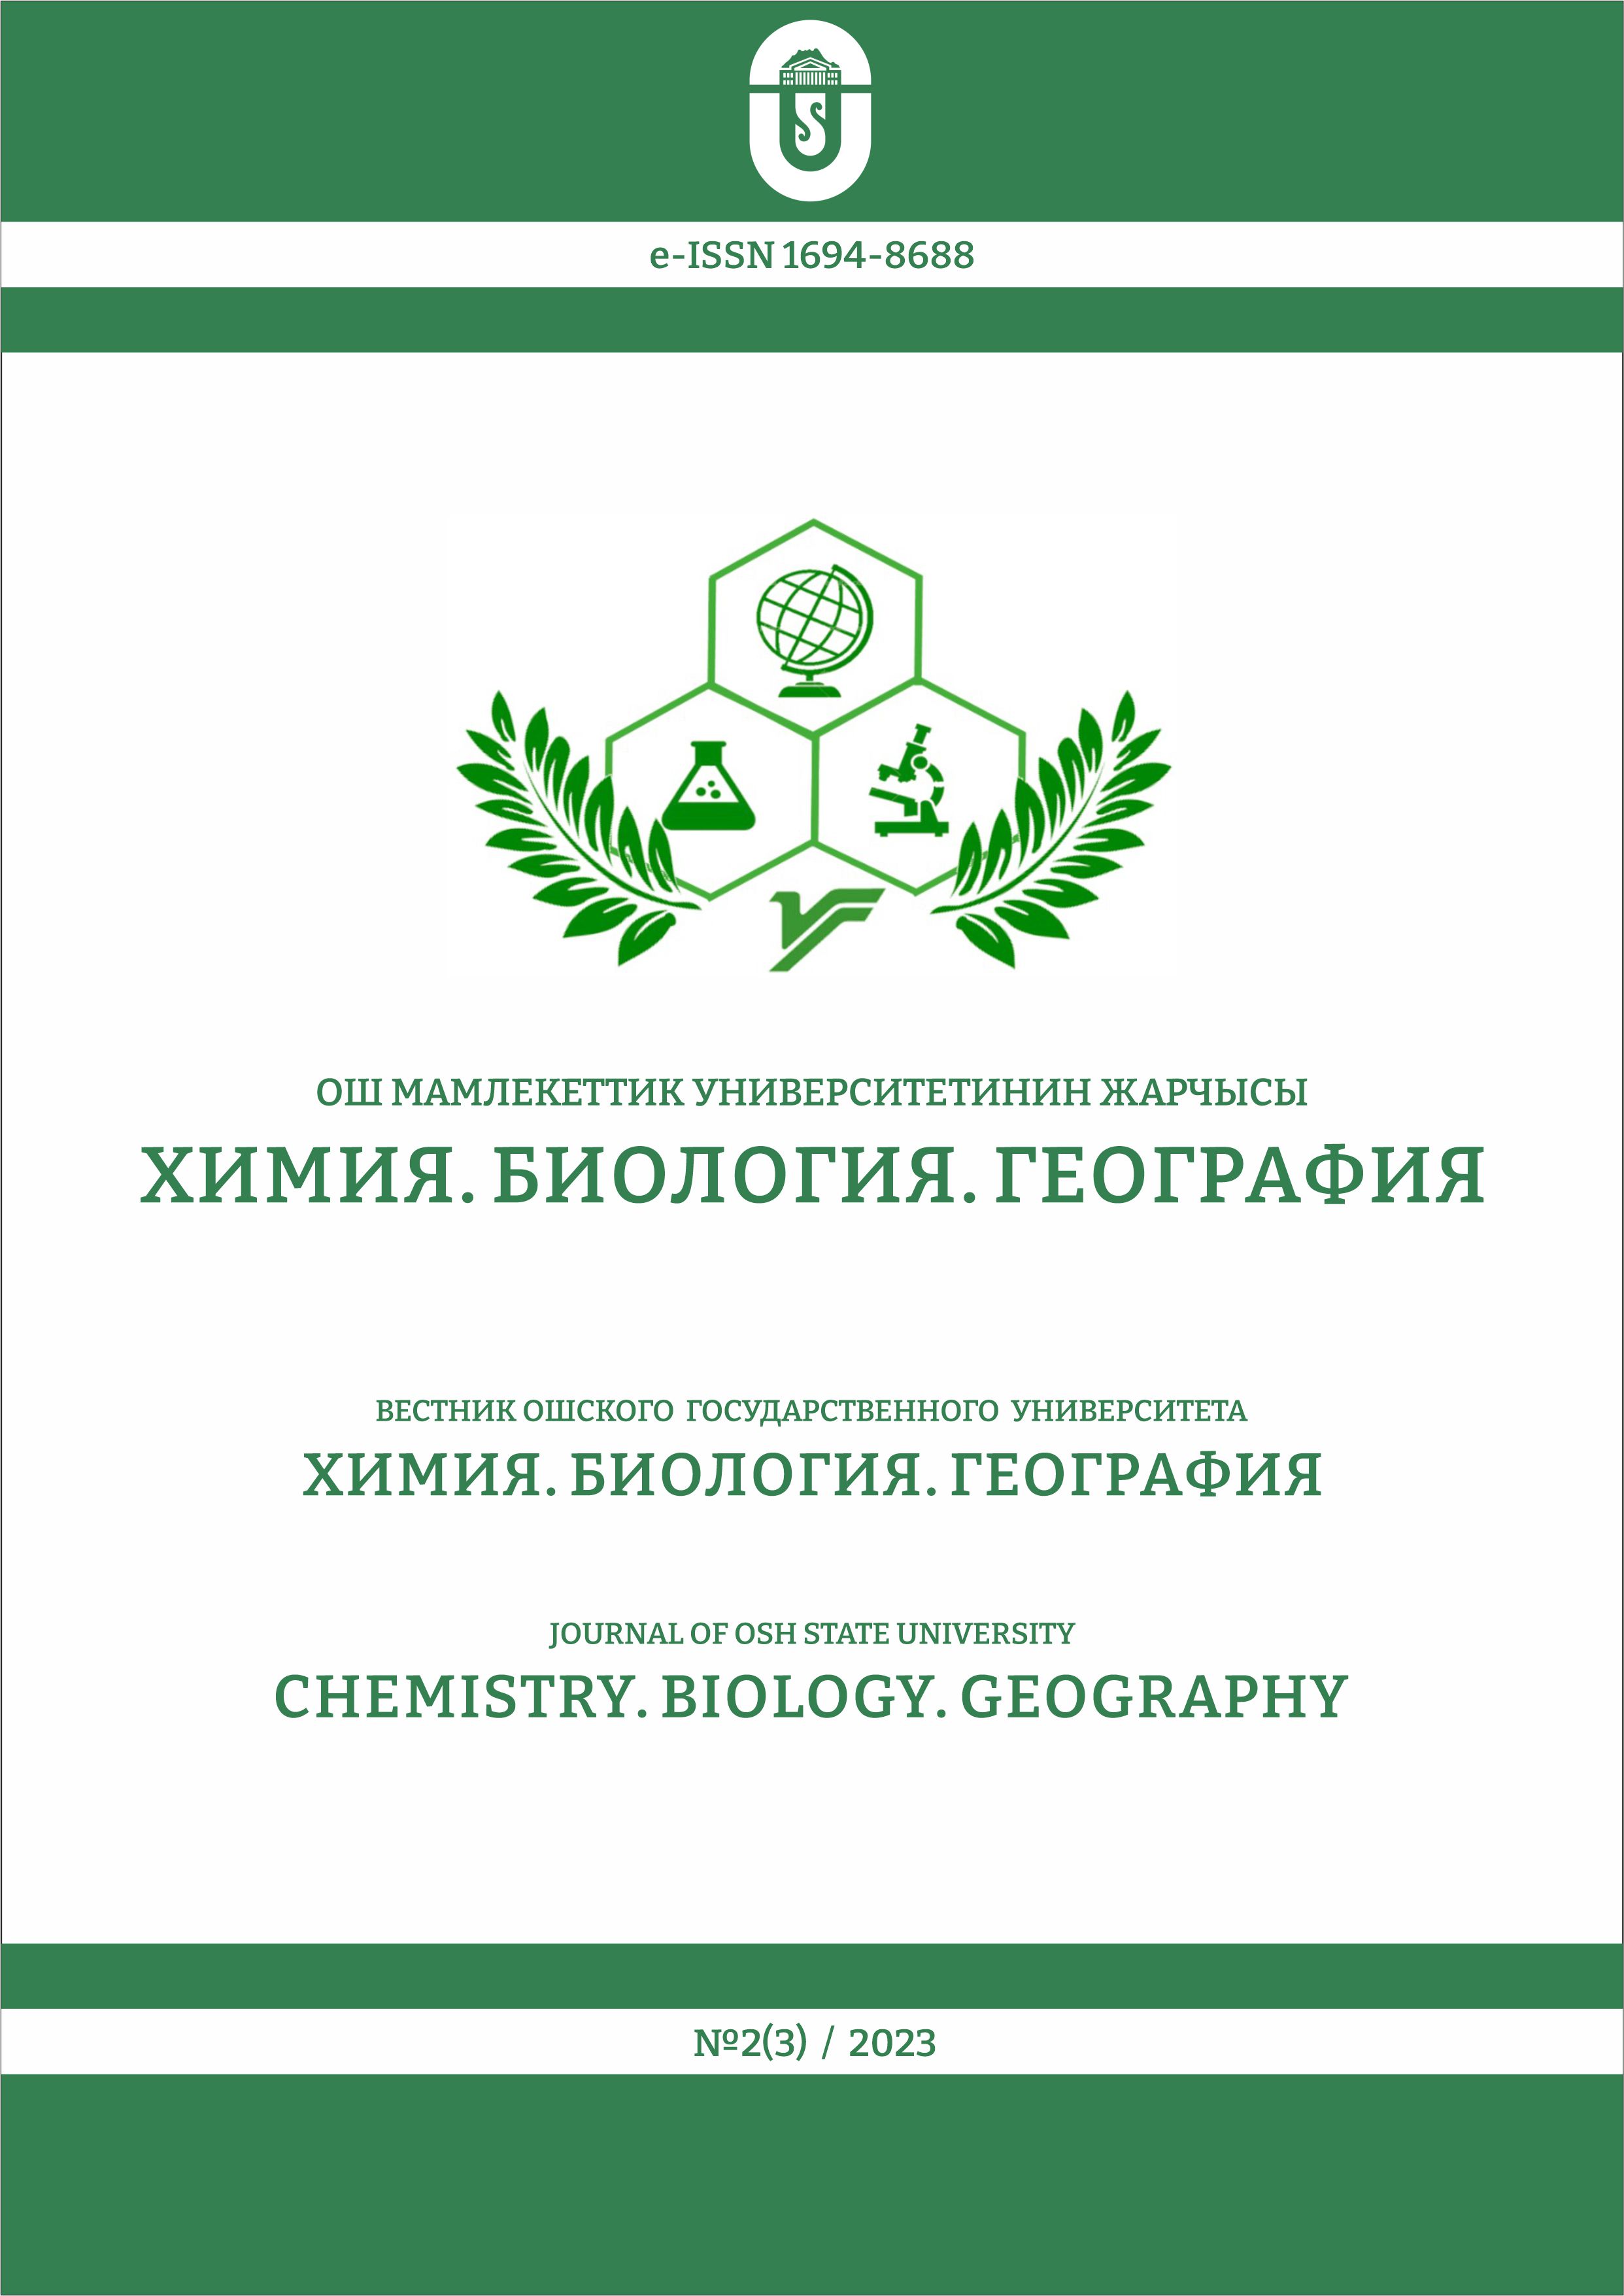 					View No. 2(3) (2023): Journal of Osh State University. Chemistry. Biology. Geography
				